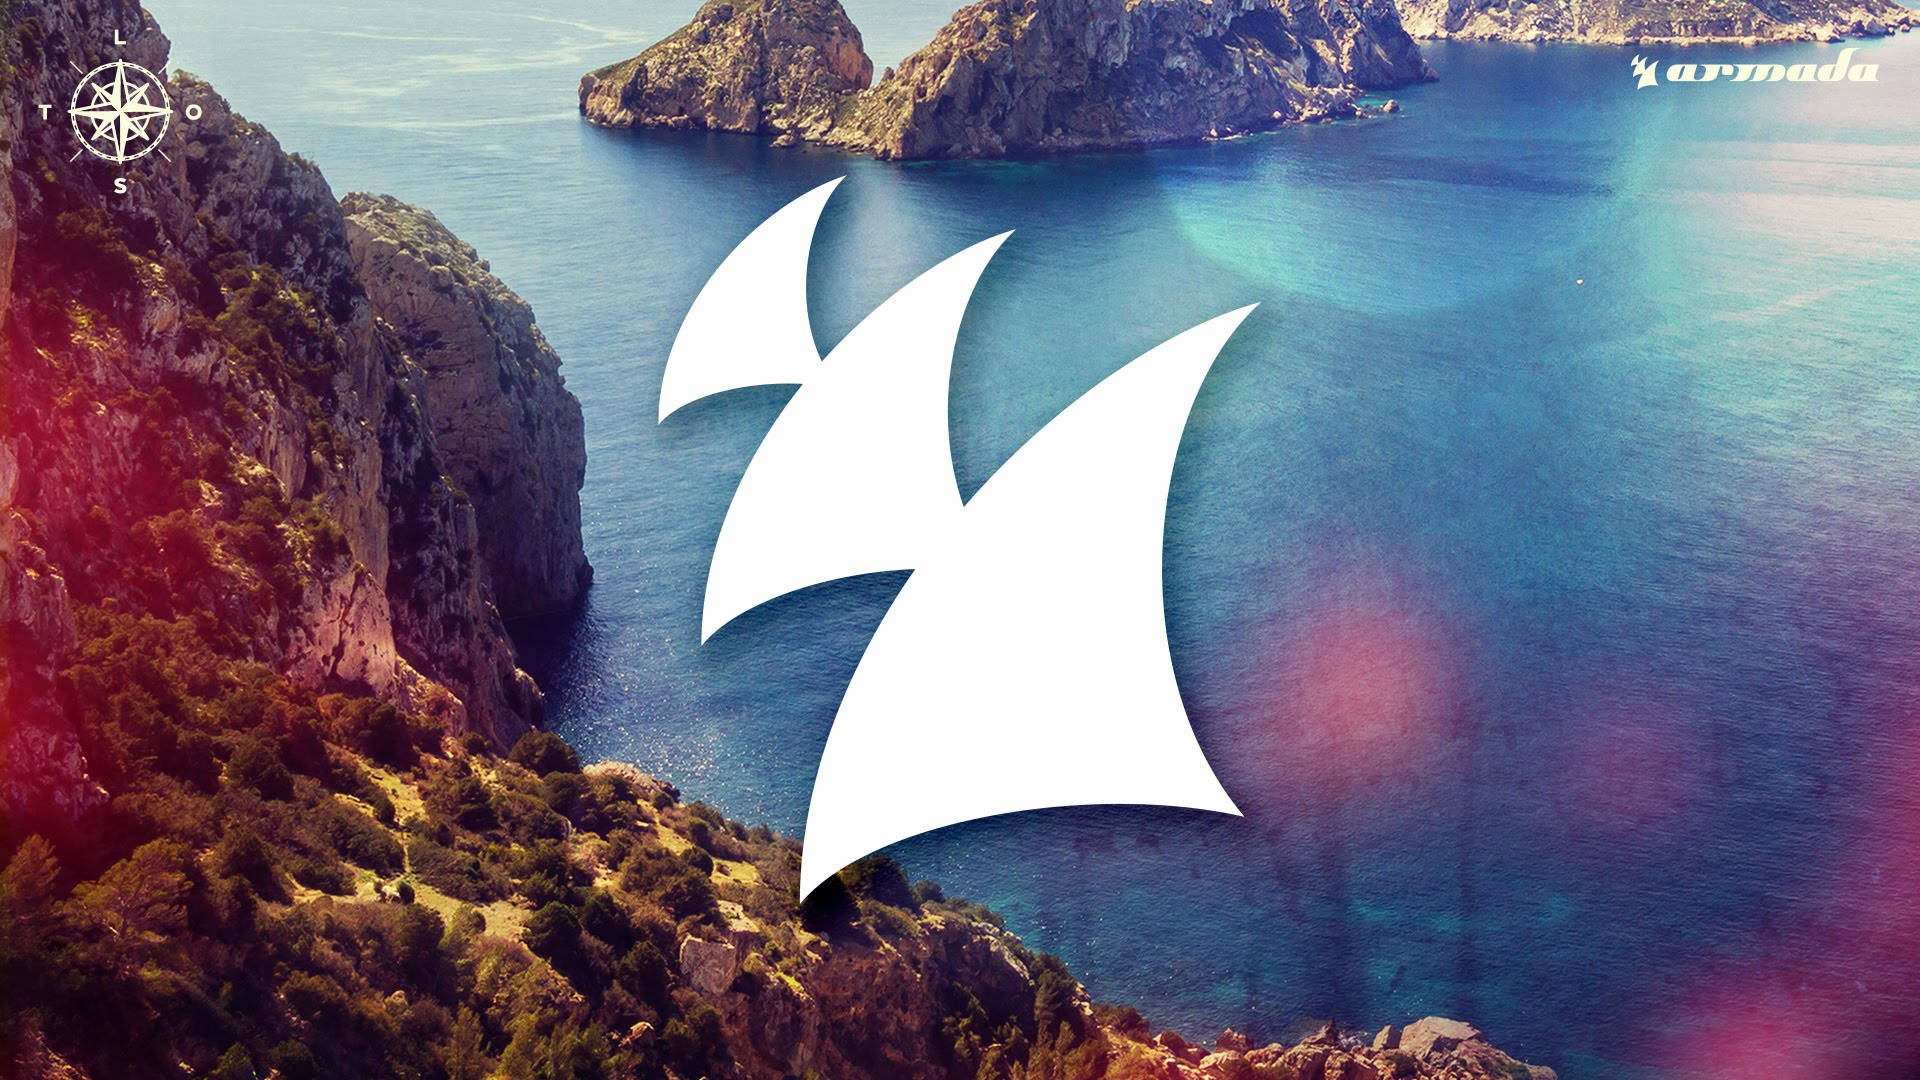 Lost Frequencies Music Logo in High Definition Wallpaper